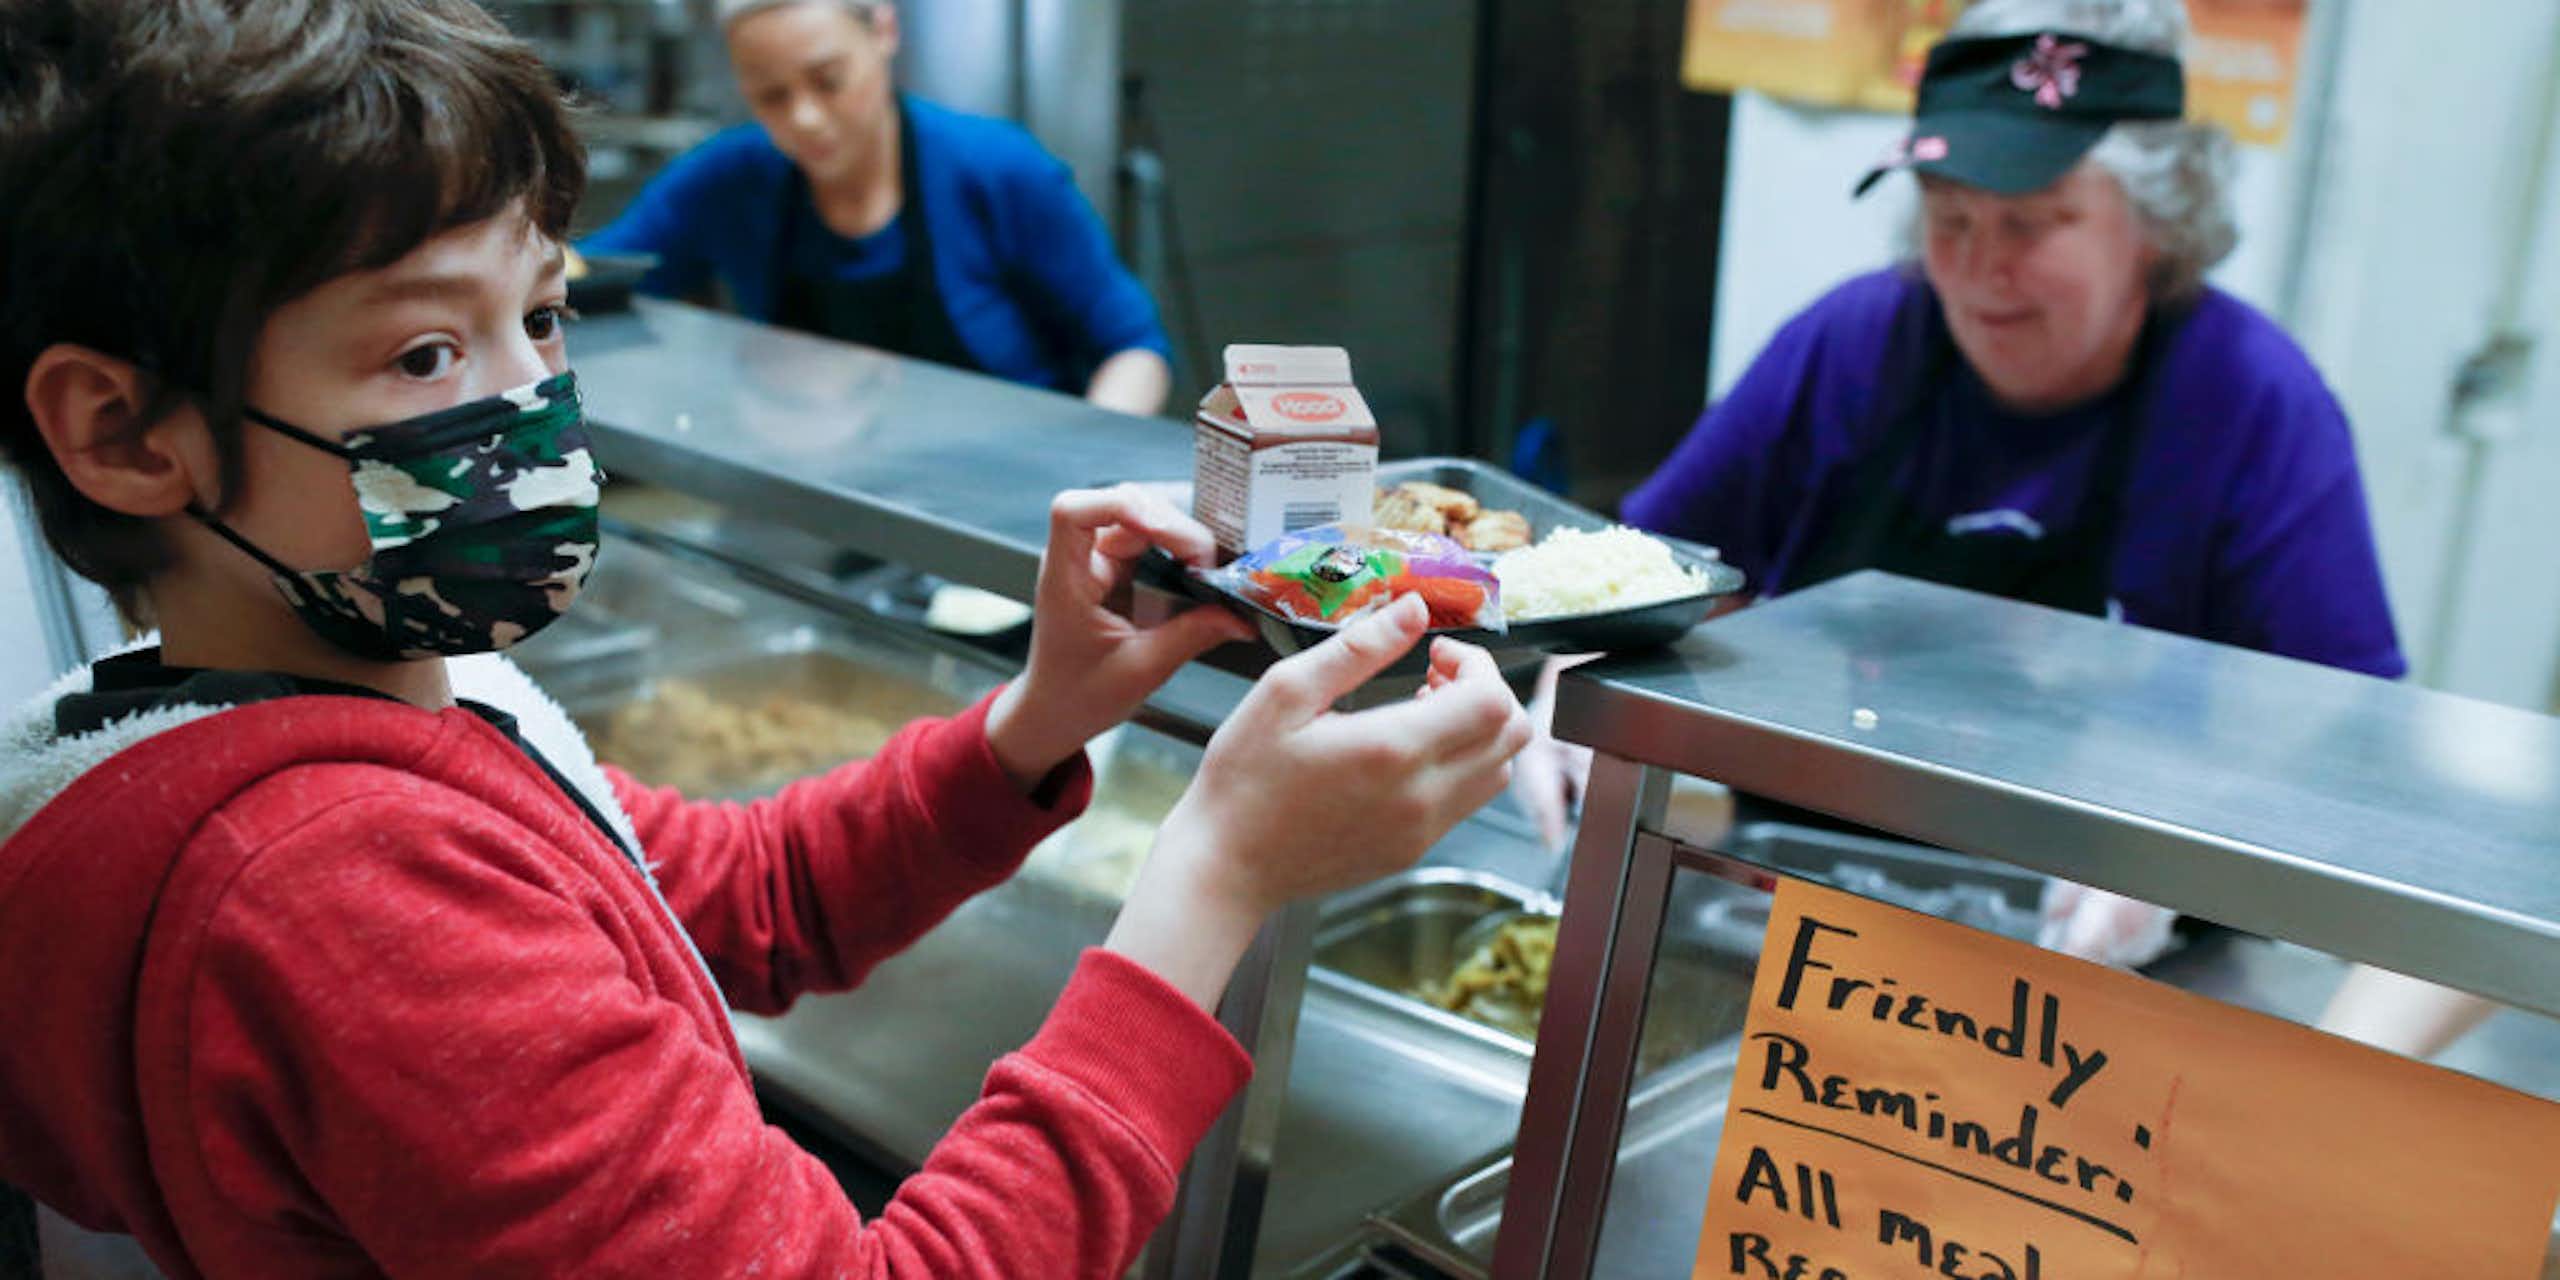 Child wearing mask holding tray of food with two cafeteria workers behind the counter. A sign reads "Friendly reminder: All meals require a fruit or vegetable."